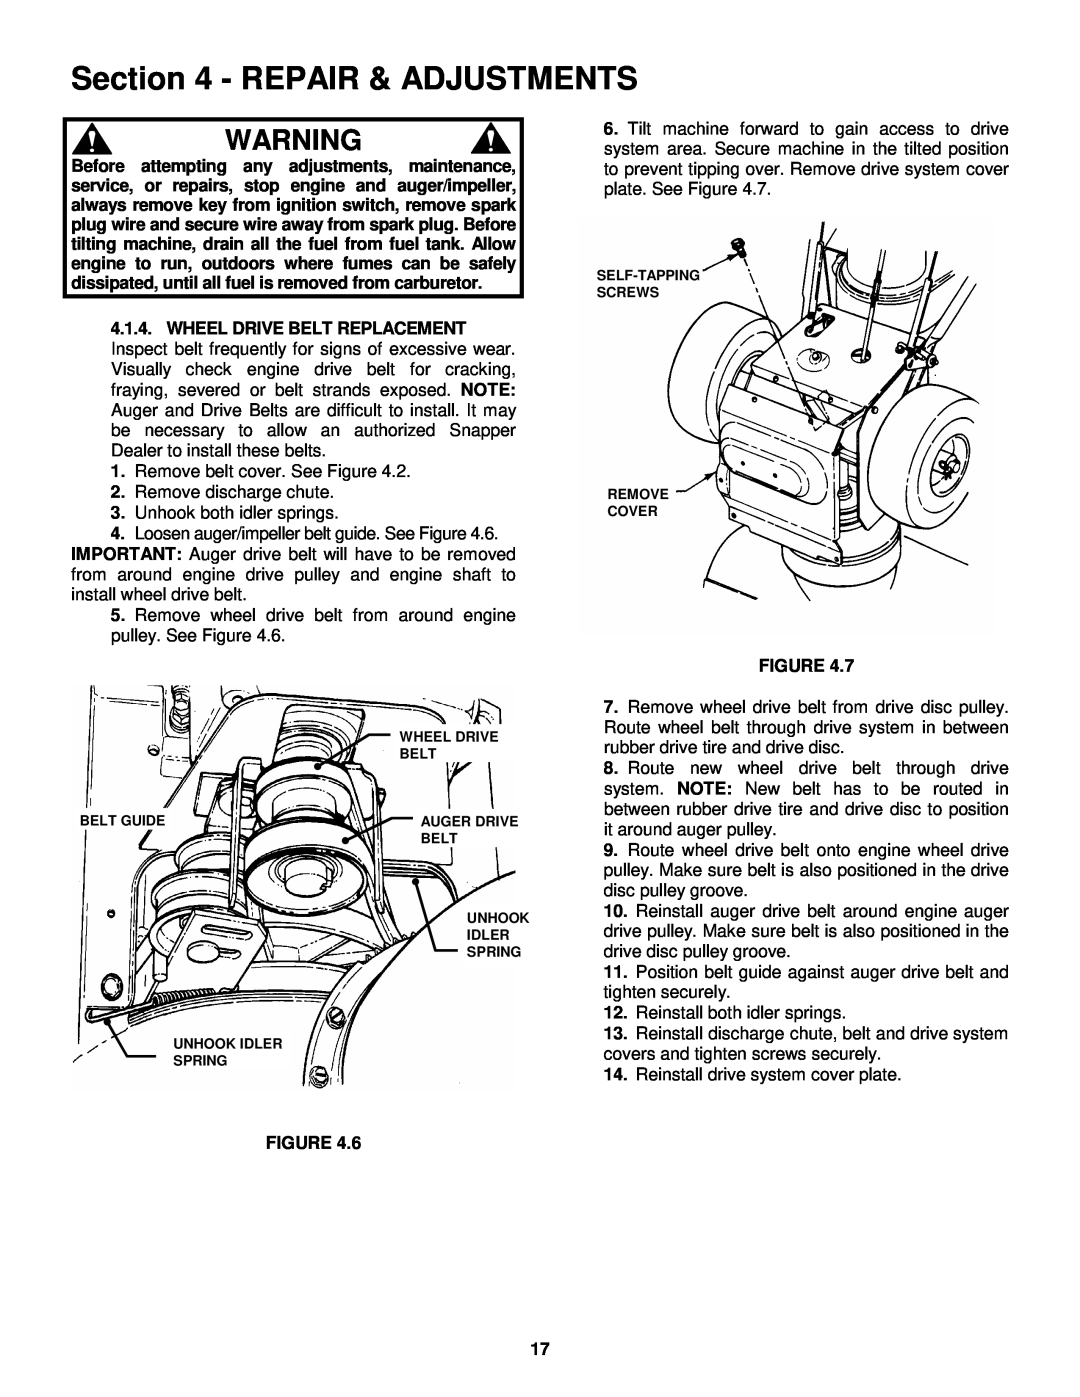 Snapper E11305, E9265 important safety instructions Repair & Adjustments 